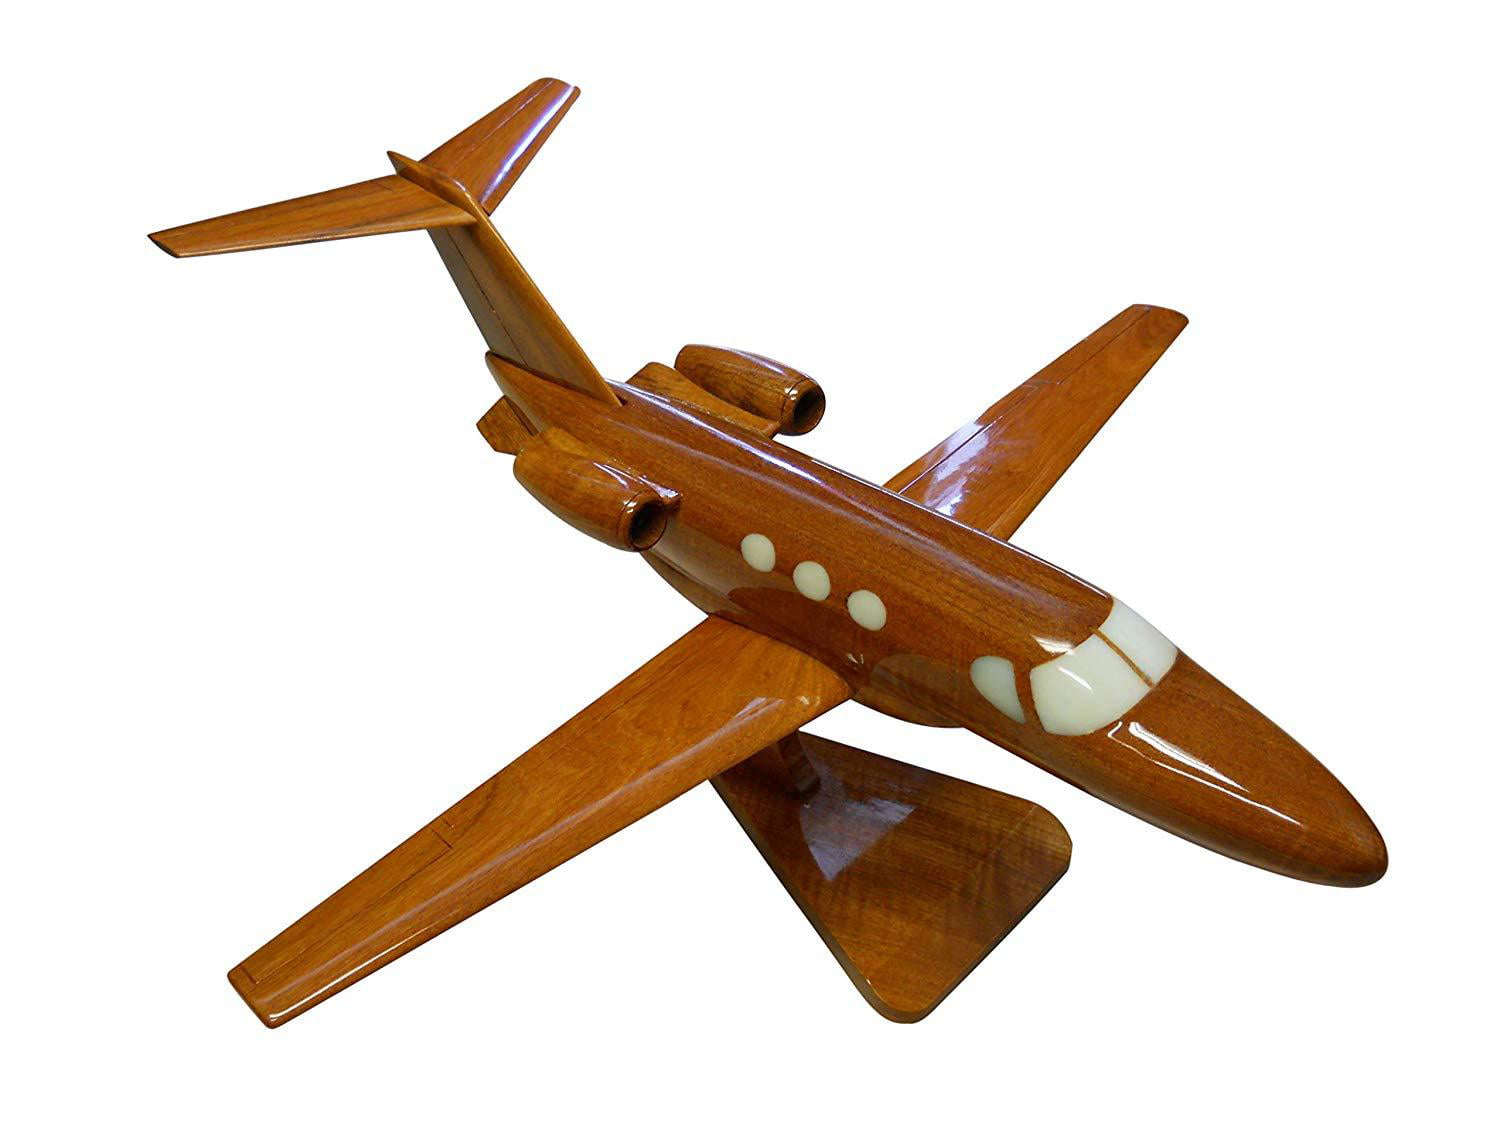 Buy Cessna Citation Mustang Mahogany Wood Desktop Aircraft Model Online At Lowest Price In India